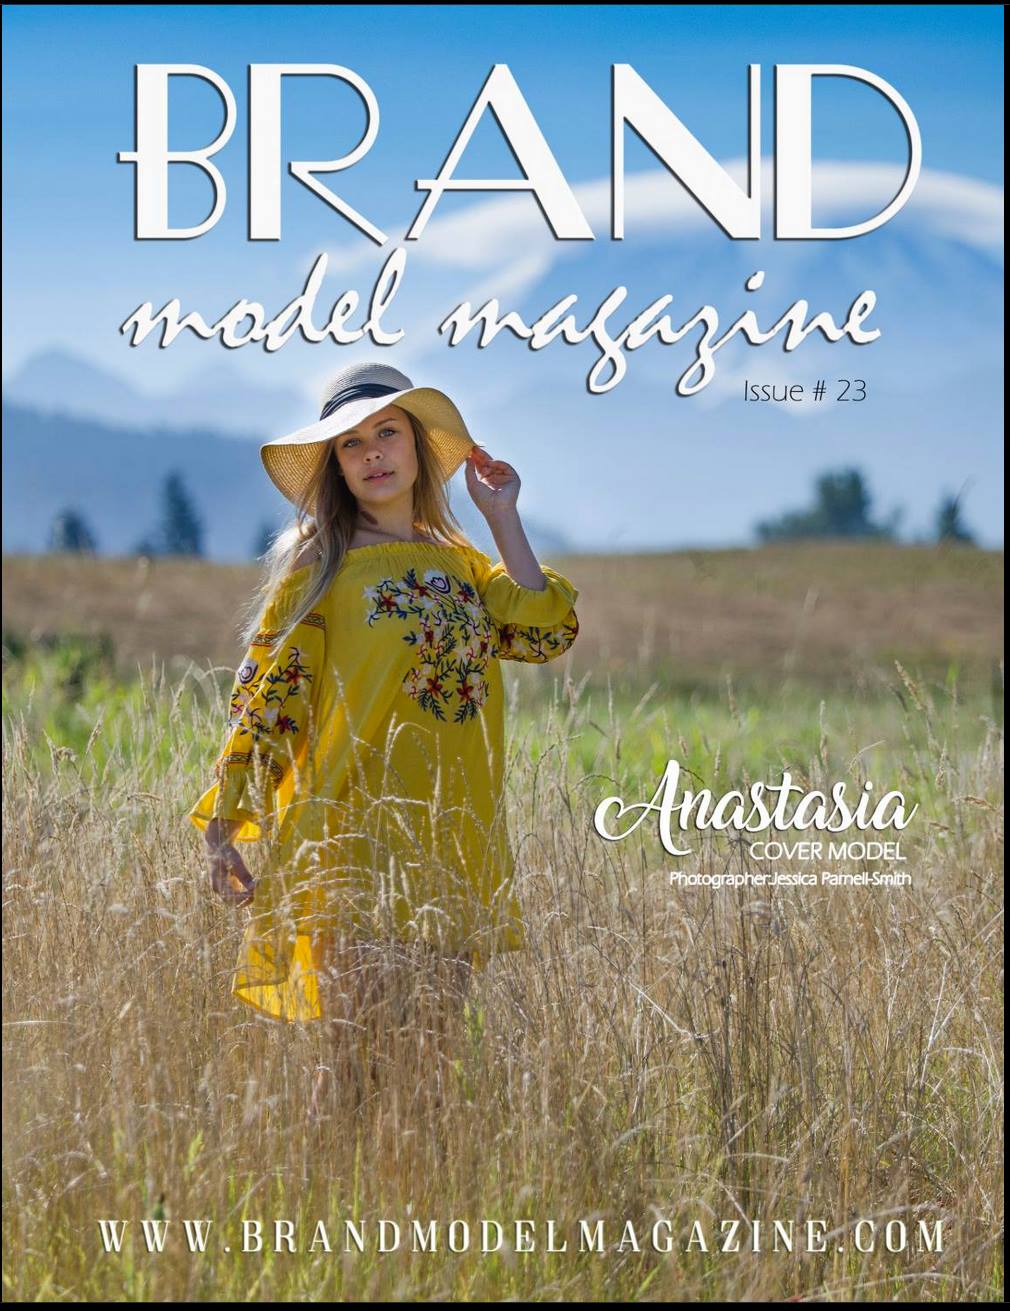 Brand Model Magazine - Issue # 23 http://www.magcloud.com/browse/issue/1340149